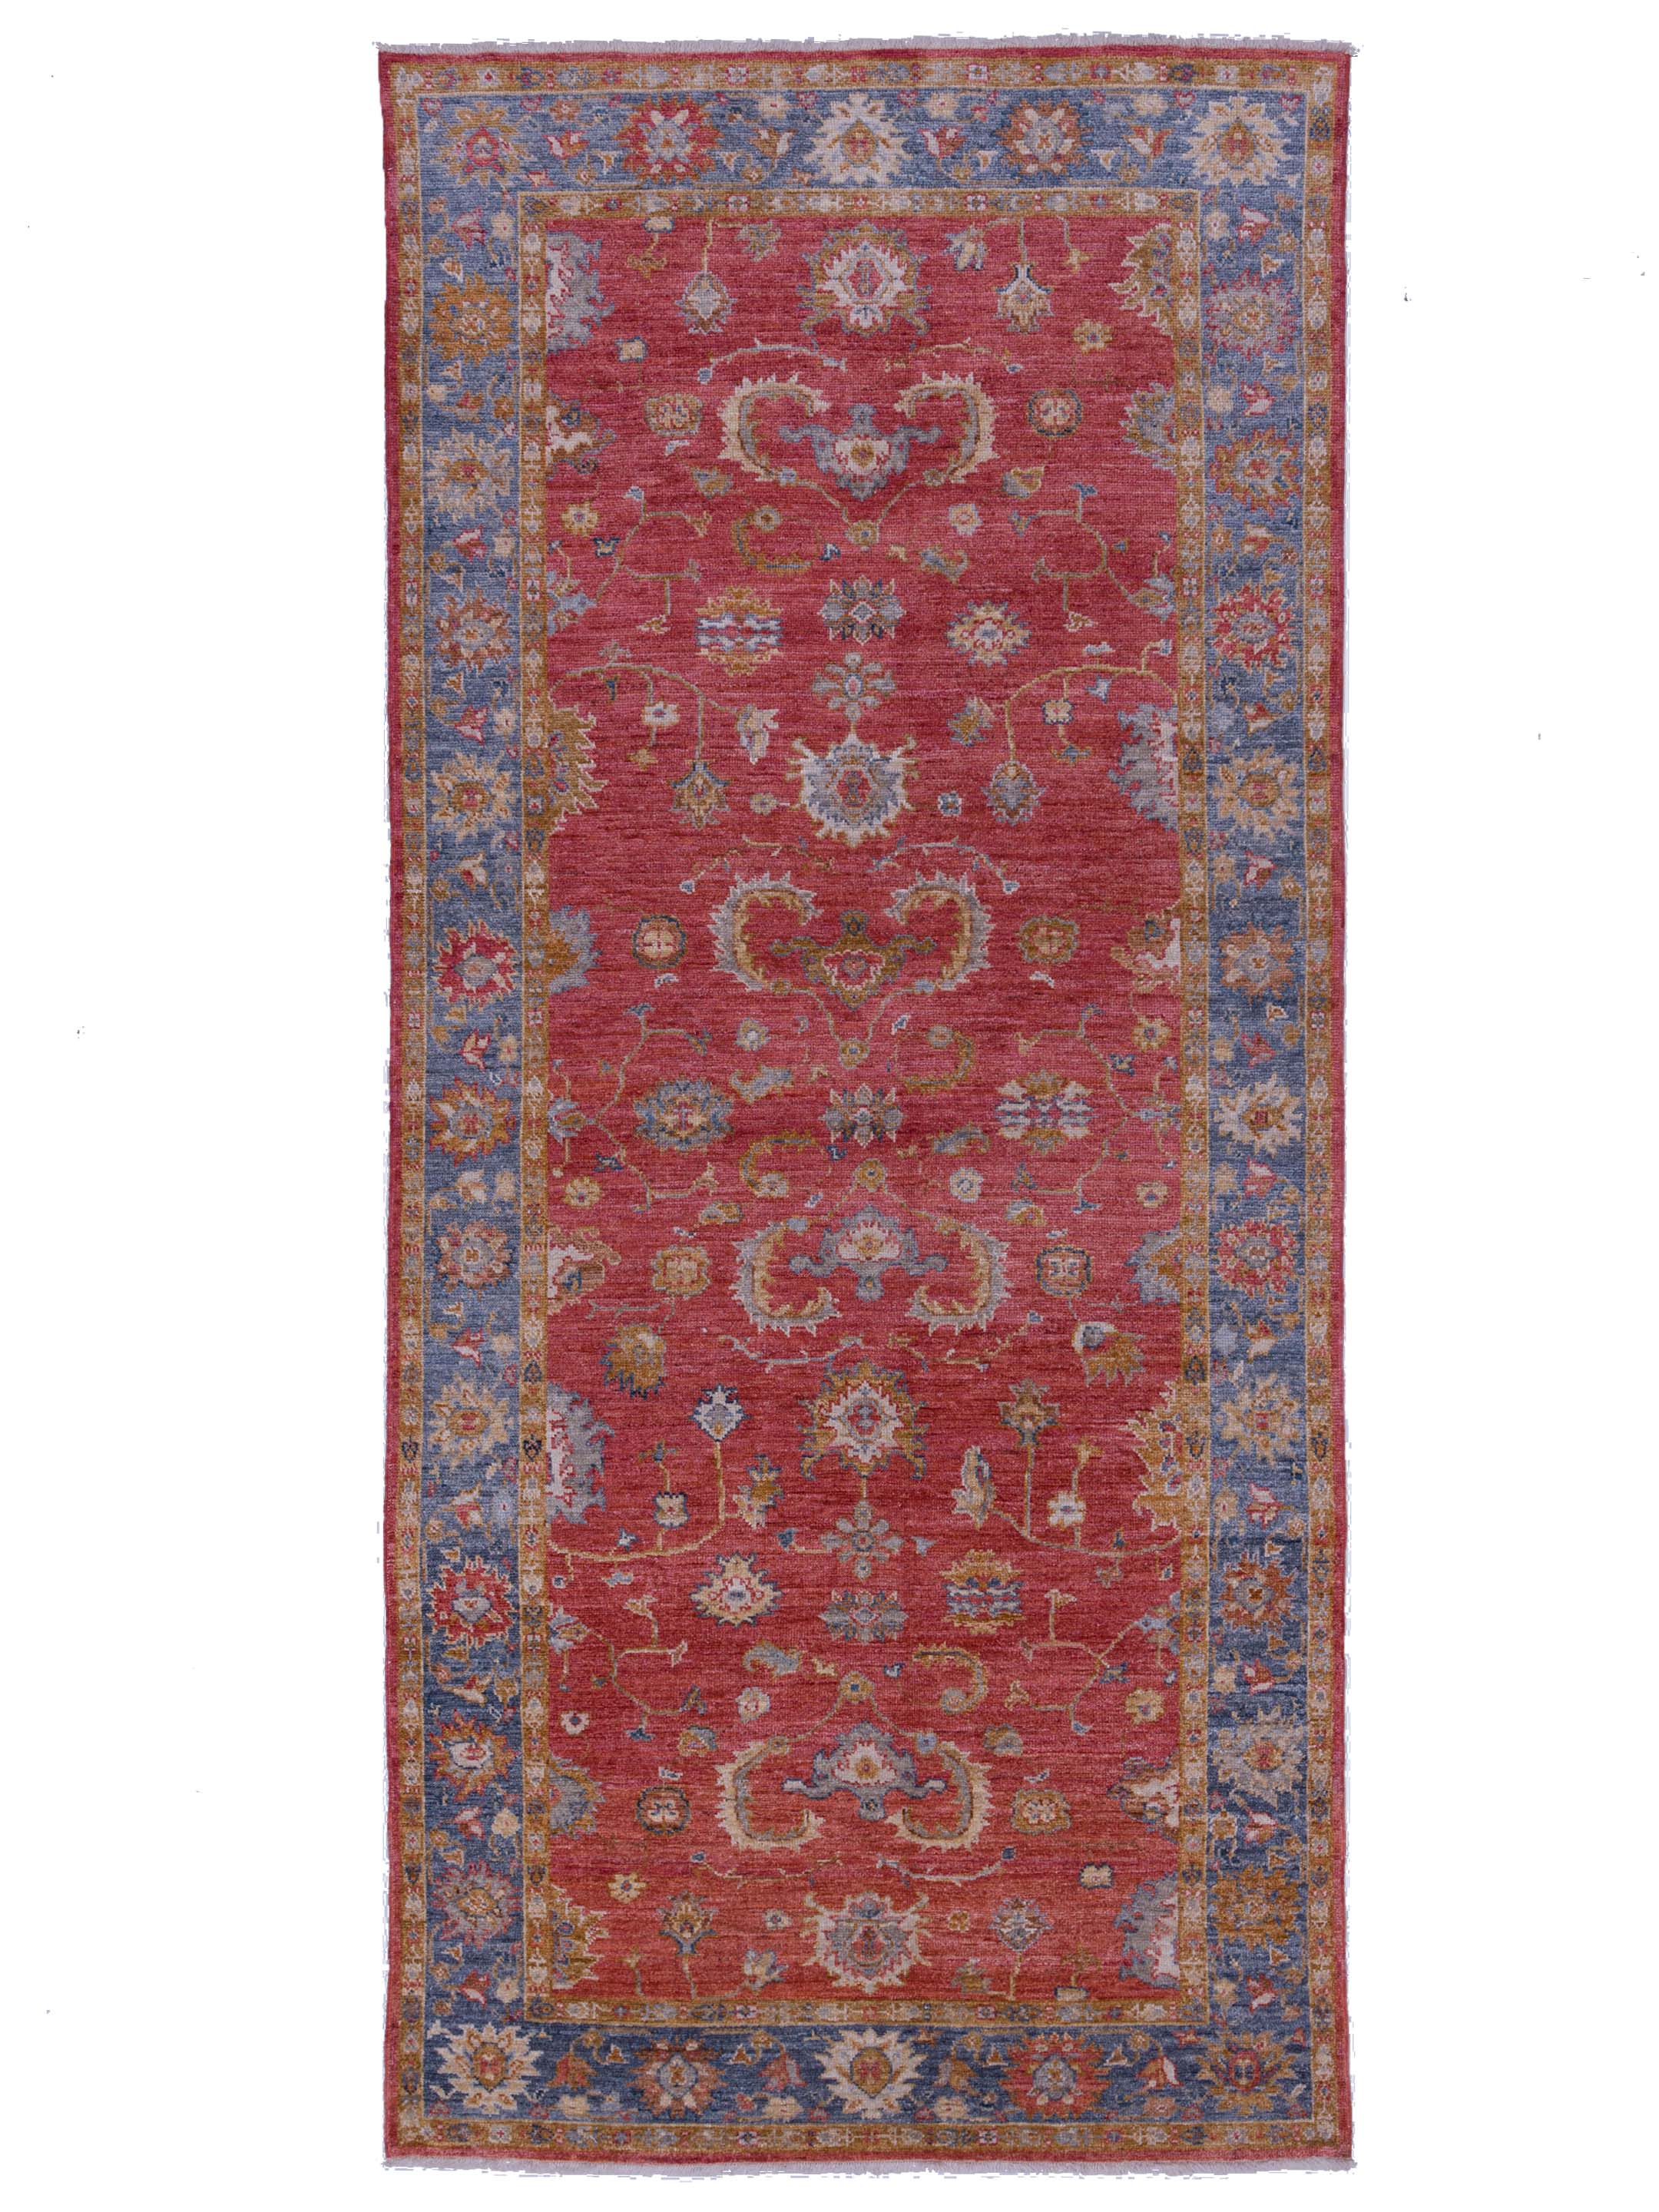 http://anadolrugs.com/product-details.php?id=4987&style=&collection=Angora%20Oushak&size123=6x14&color=&weave=	